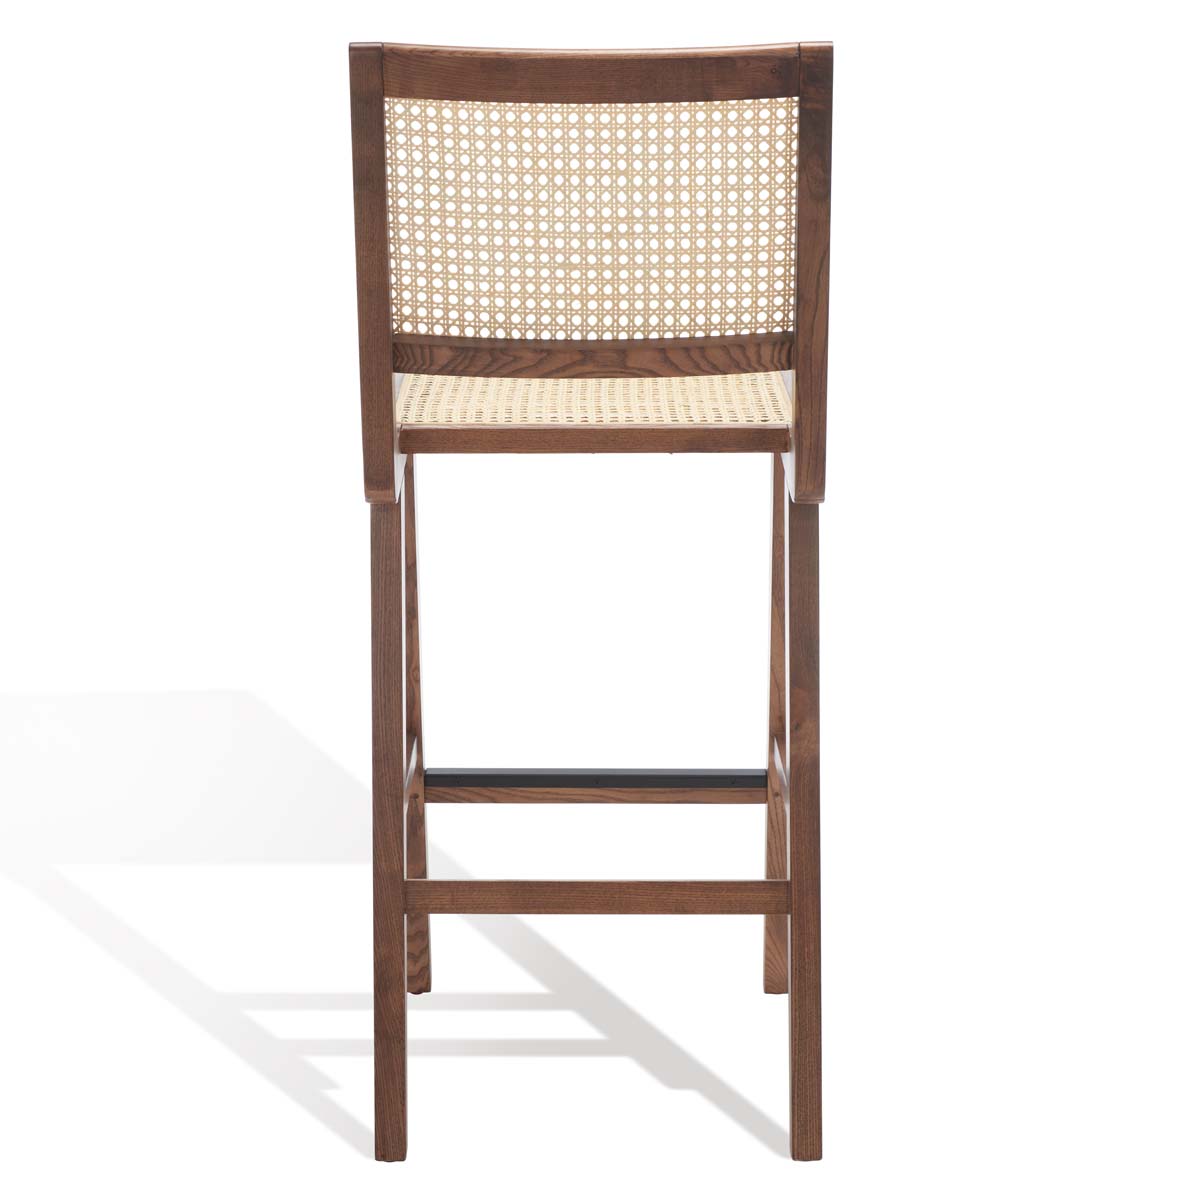 Safavieh Couture Hattie French Cane Barstool